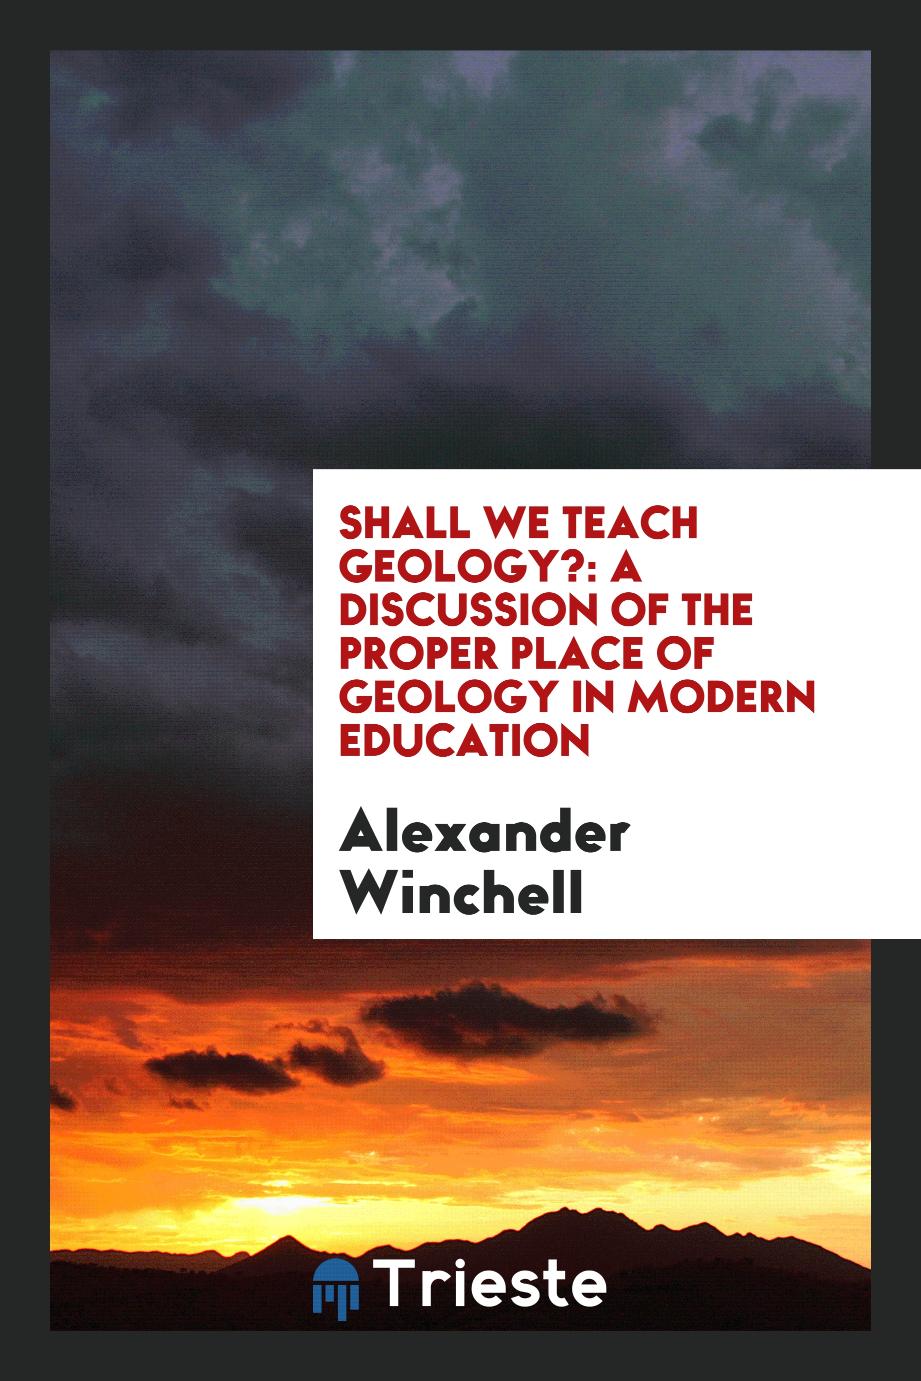 Shall We Teach Geology?: A Discussion of the Proper Place of Geology in Modern Education